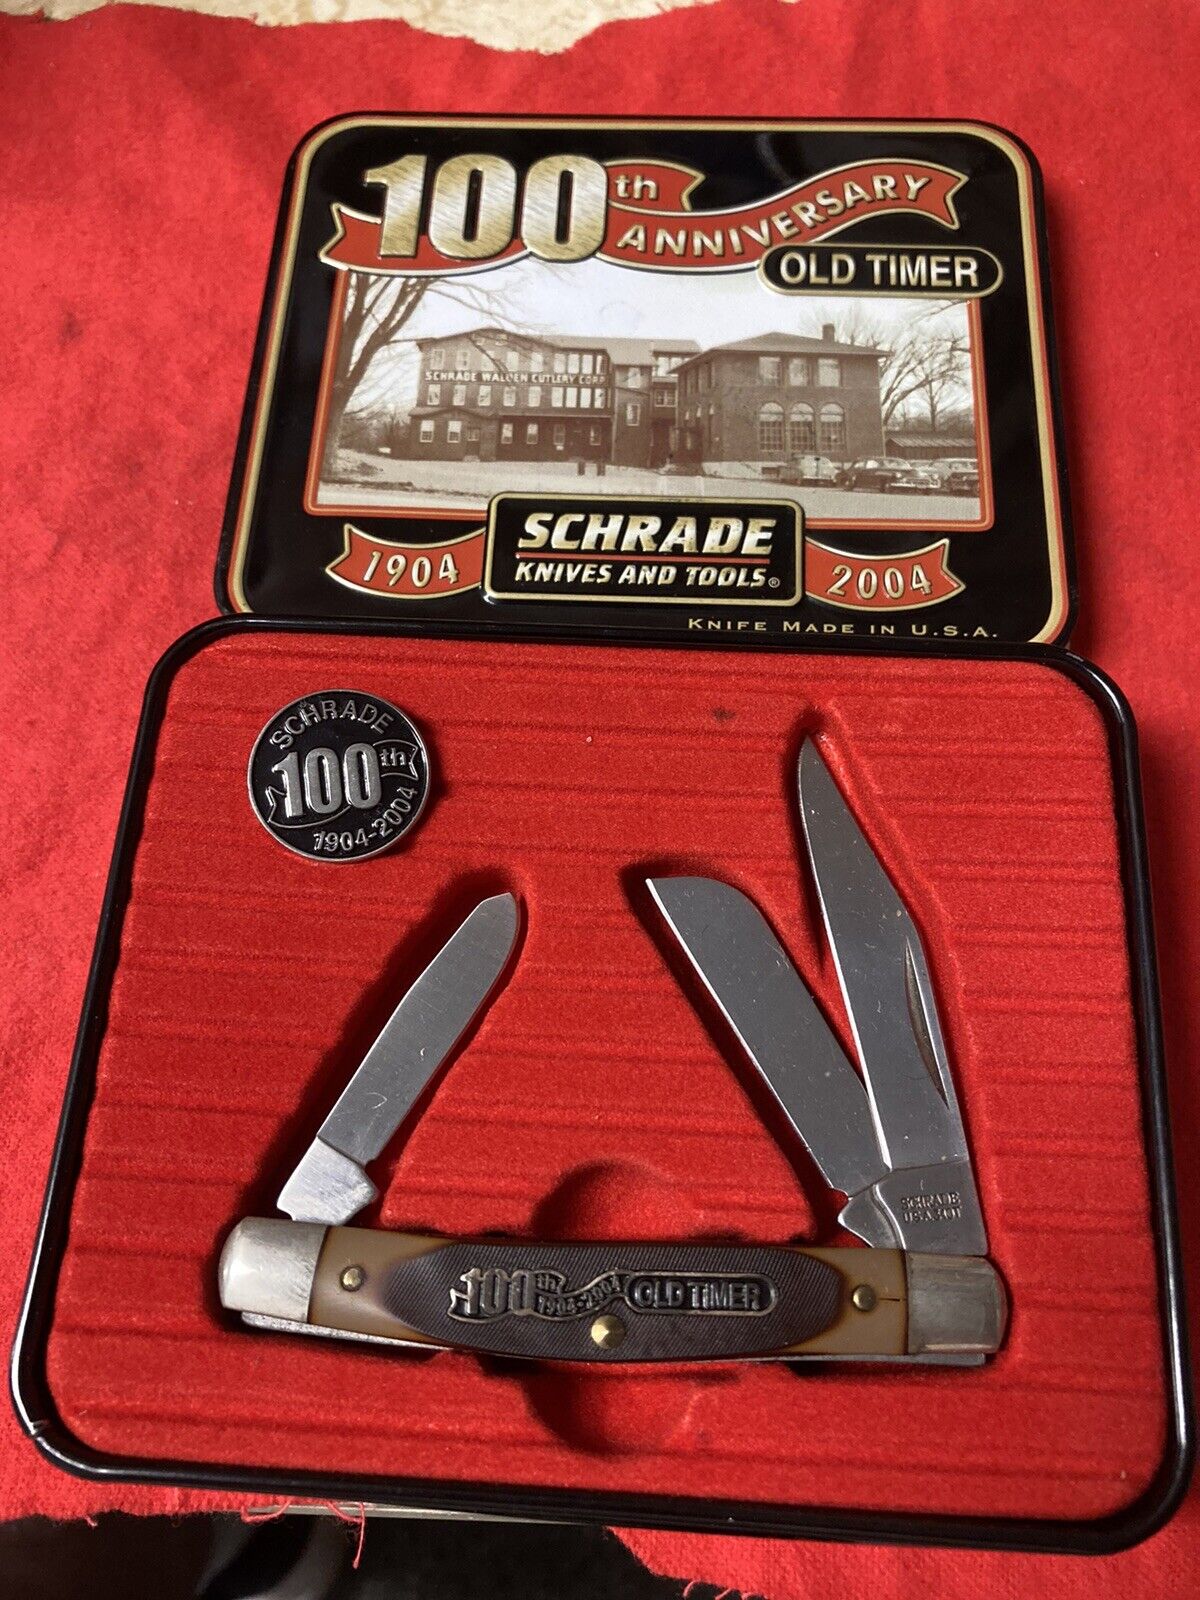 Schrade 100th Anniversary Old Timer 340T Knife w/ Pin and Tin 2004